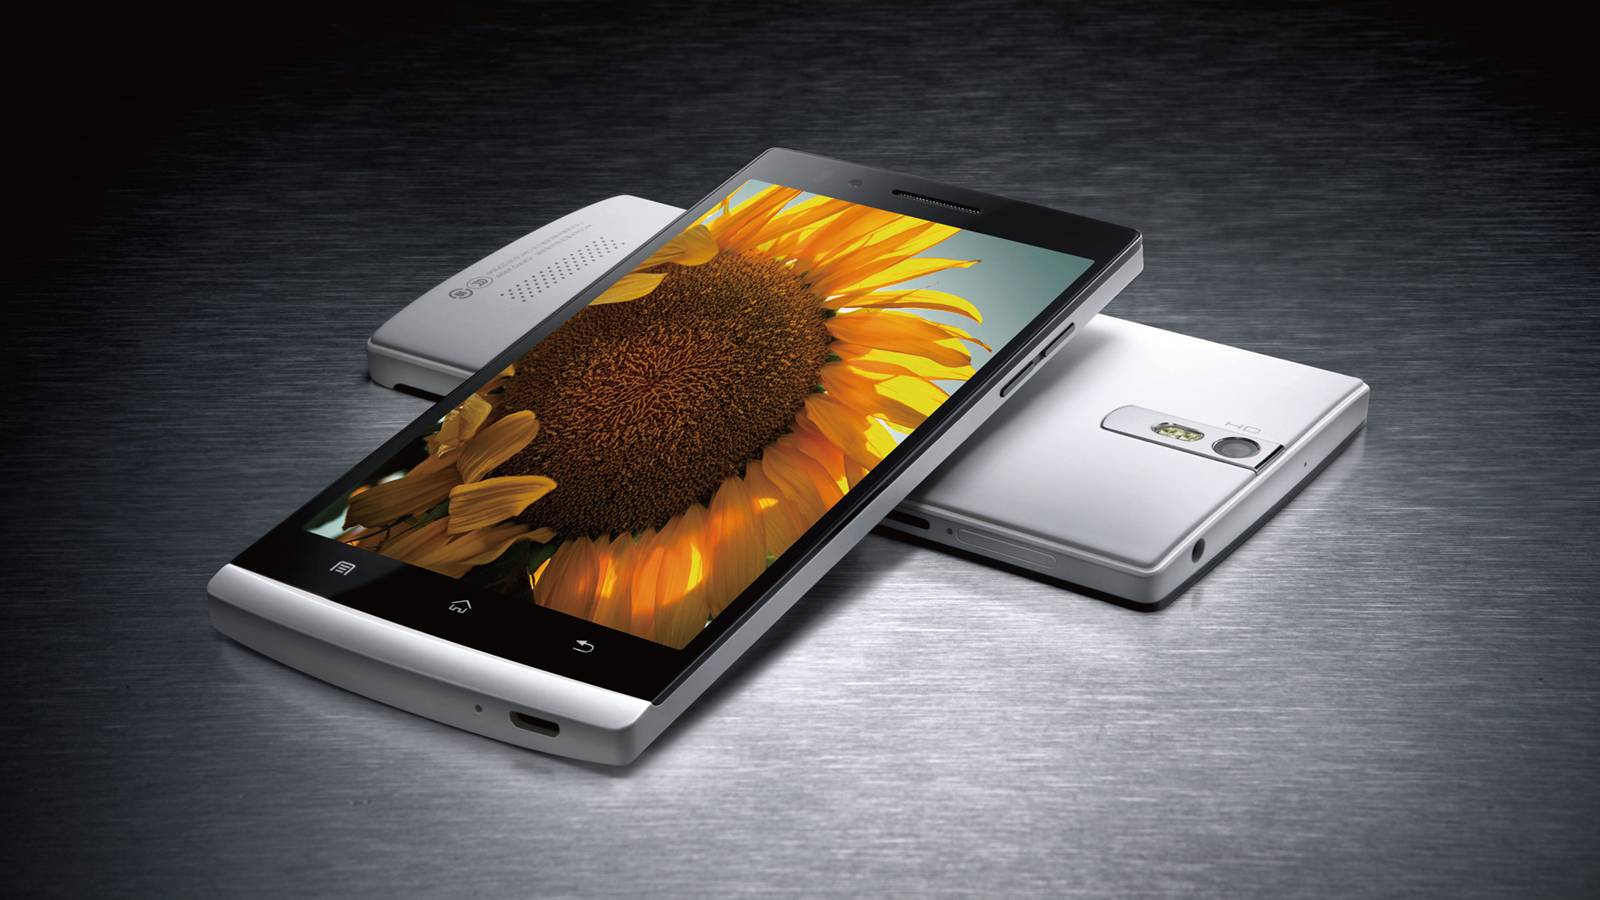 Oppo Find 5 Price In India - HD Wallpaper 